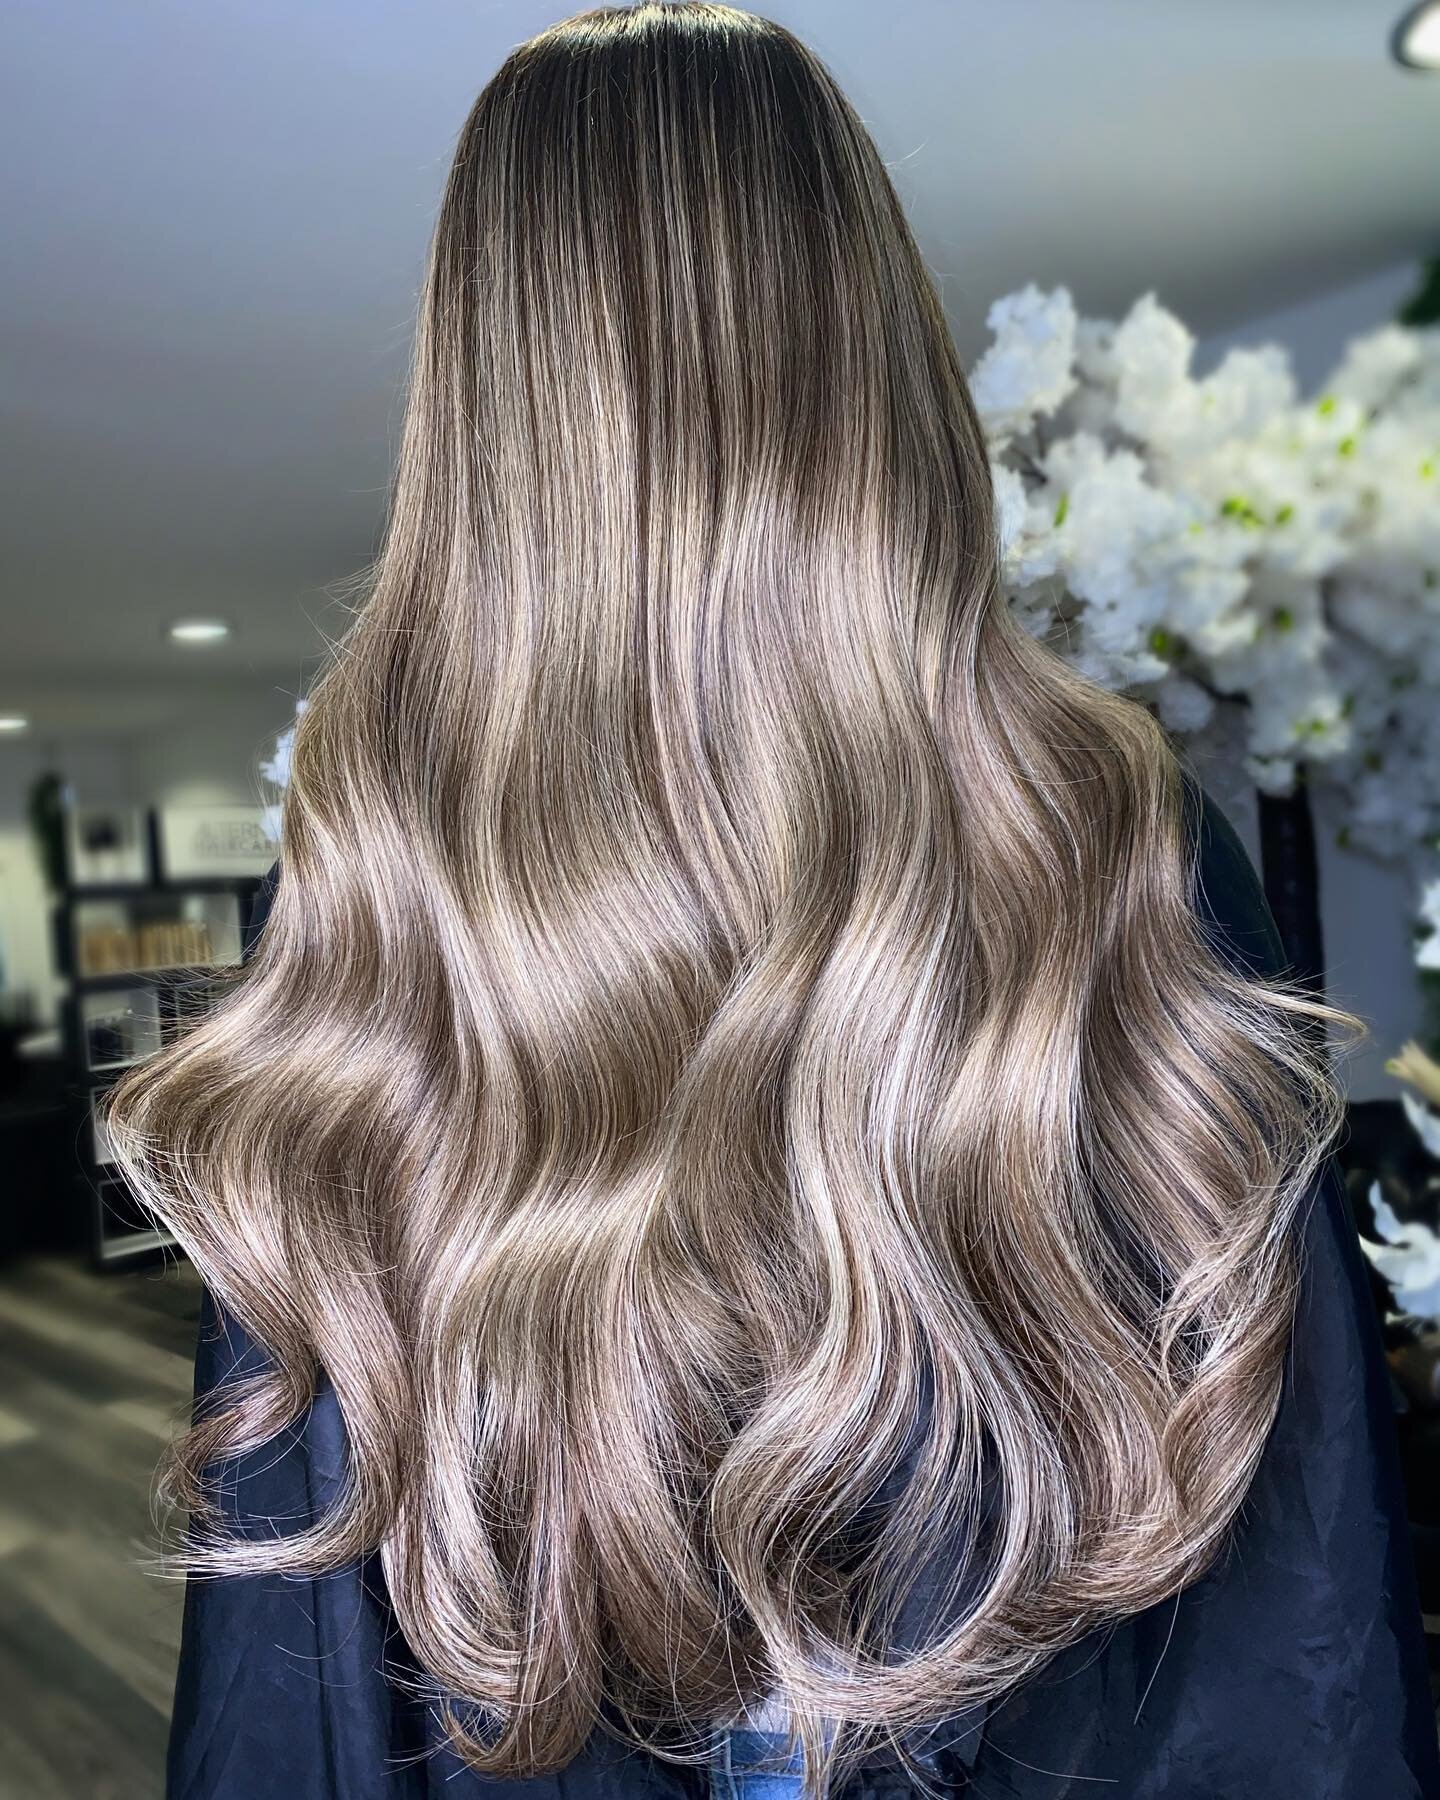 𝙗 𝙧 𝙤 𝙣 𝙙 𝙚 🤍 all the way from Scotland to come for her colour &amp; @opulencebyelliotcaffrey transformation. Using a mix of &lsquo;Hazel&rsquo; + &lsquo;Cara&rsquo; + &lsquo;Ash Cream&rsquo; 24&rdquo; Tape Attachment.

-
-
-
-
#ElliotCaffreyH